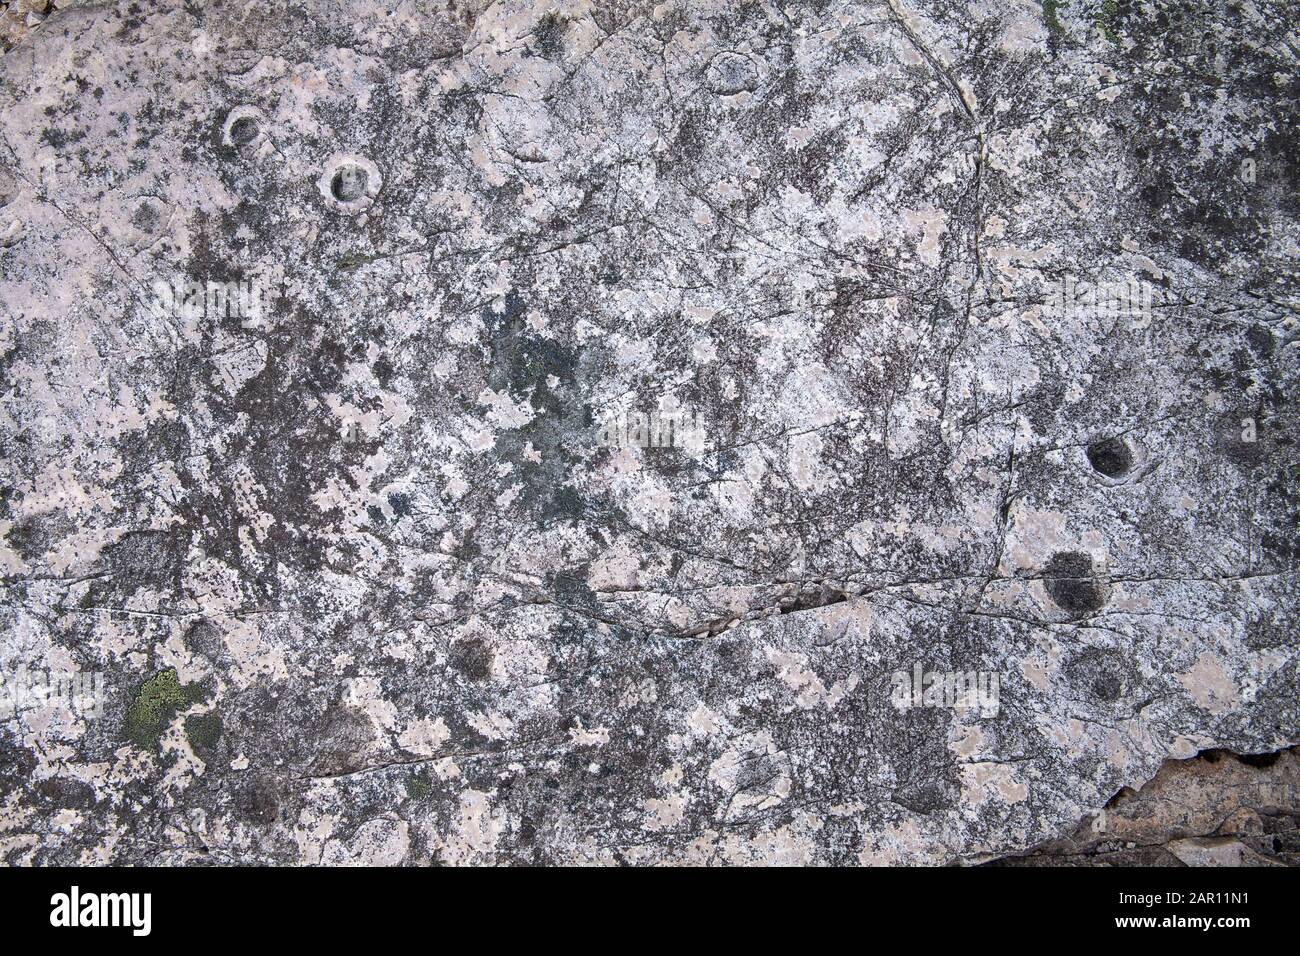 Pockmarks on the surface of whiteish Torridonian quarzite rock caused by fossilized worm burrows Stock Photo